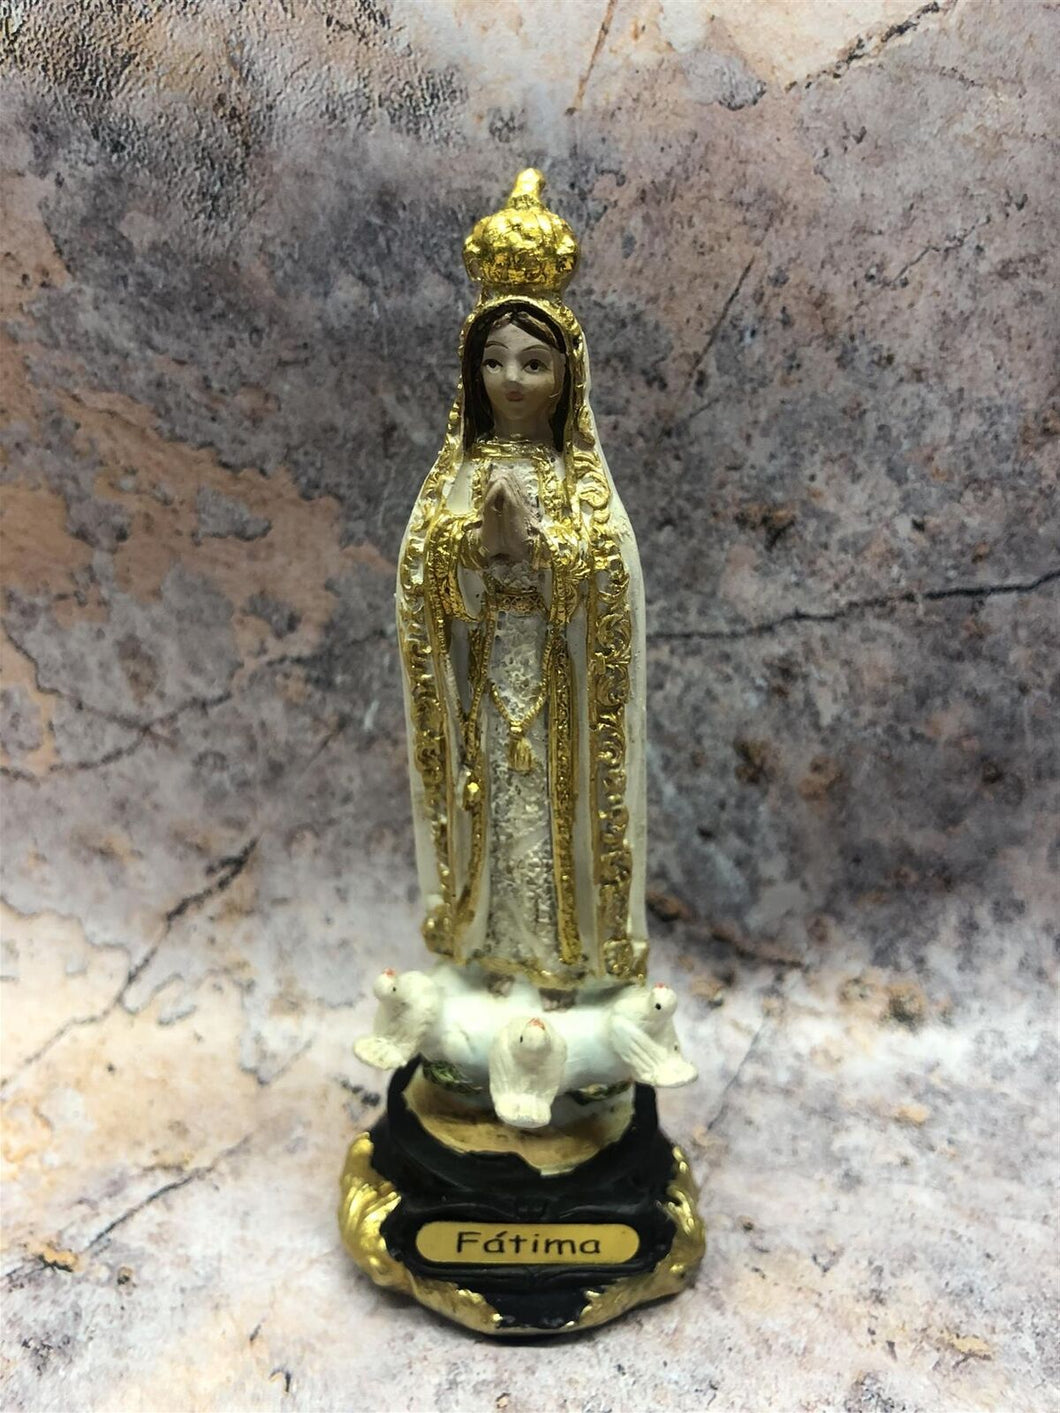 Small Blessed Virgin Mary Our Lady of Fatima Statue Ornament Figurine